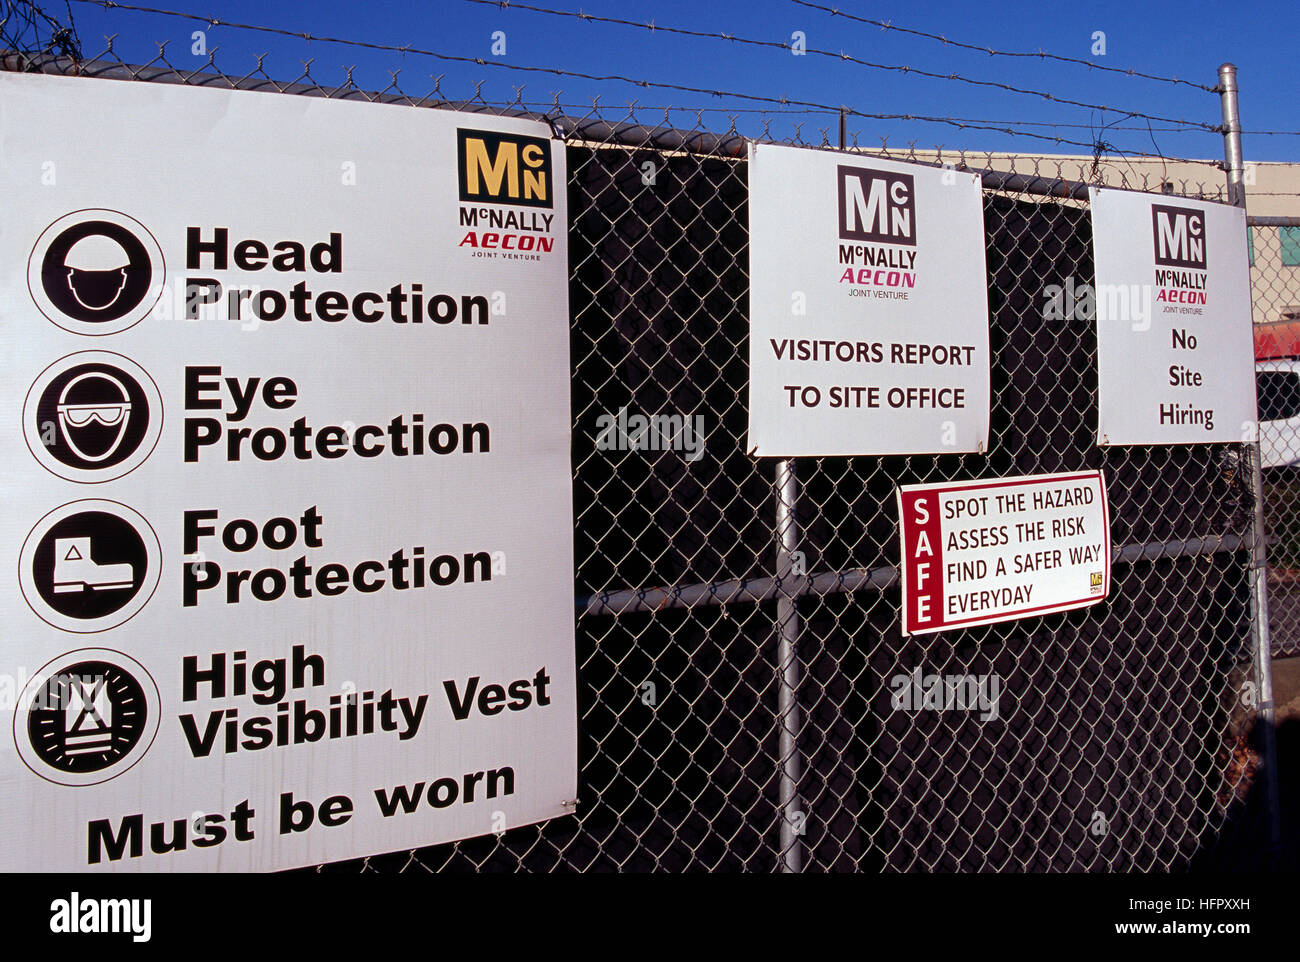 Construction Site Safety Sign - Rules and Regulations for Worker Protection posted on Fence at Building Work Site Stock Photo